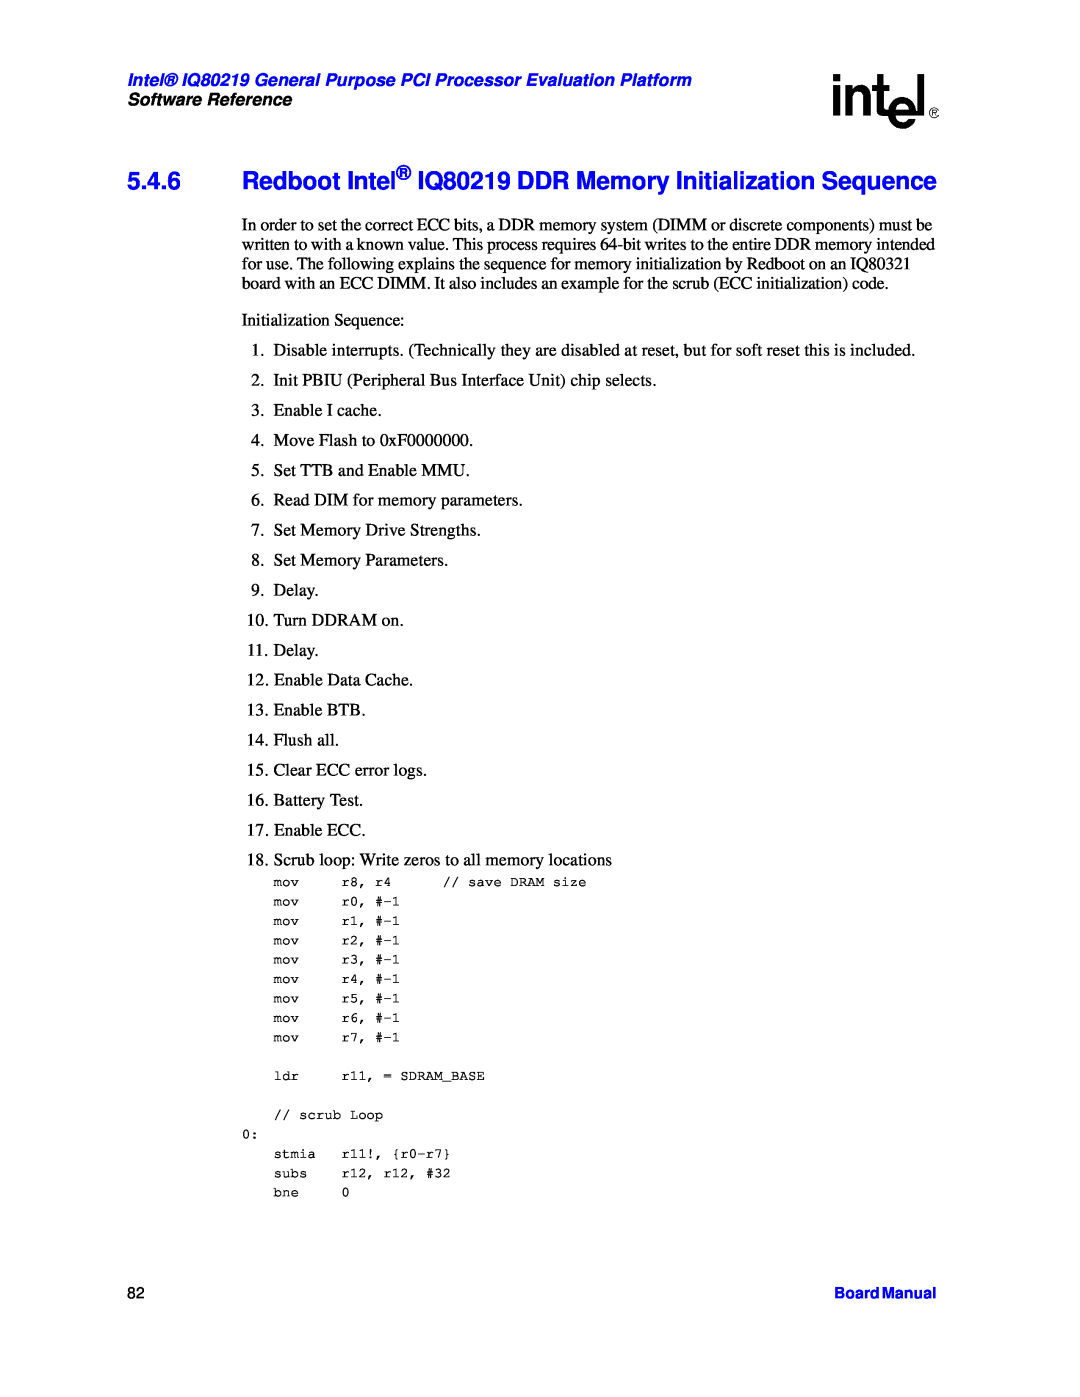 Intel manual Redboot Intel IQ80219 DDR Memory Initialization Sequence, Software Reference 